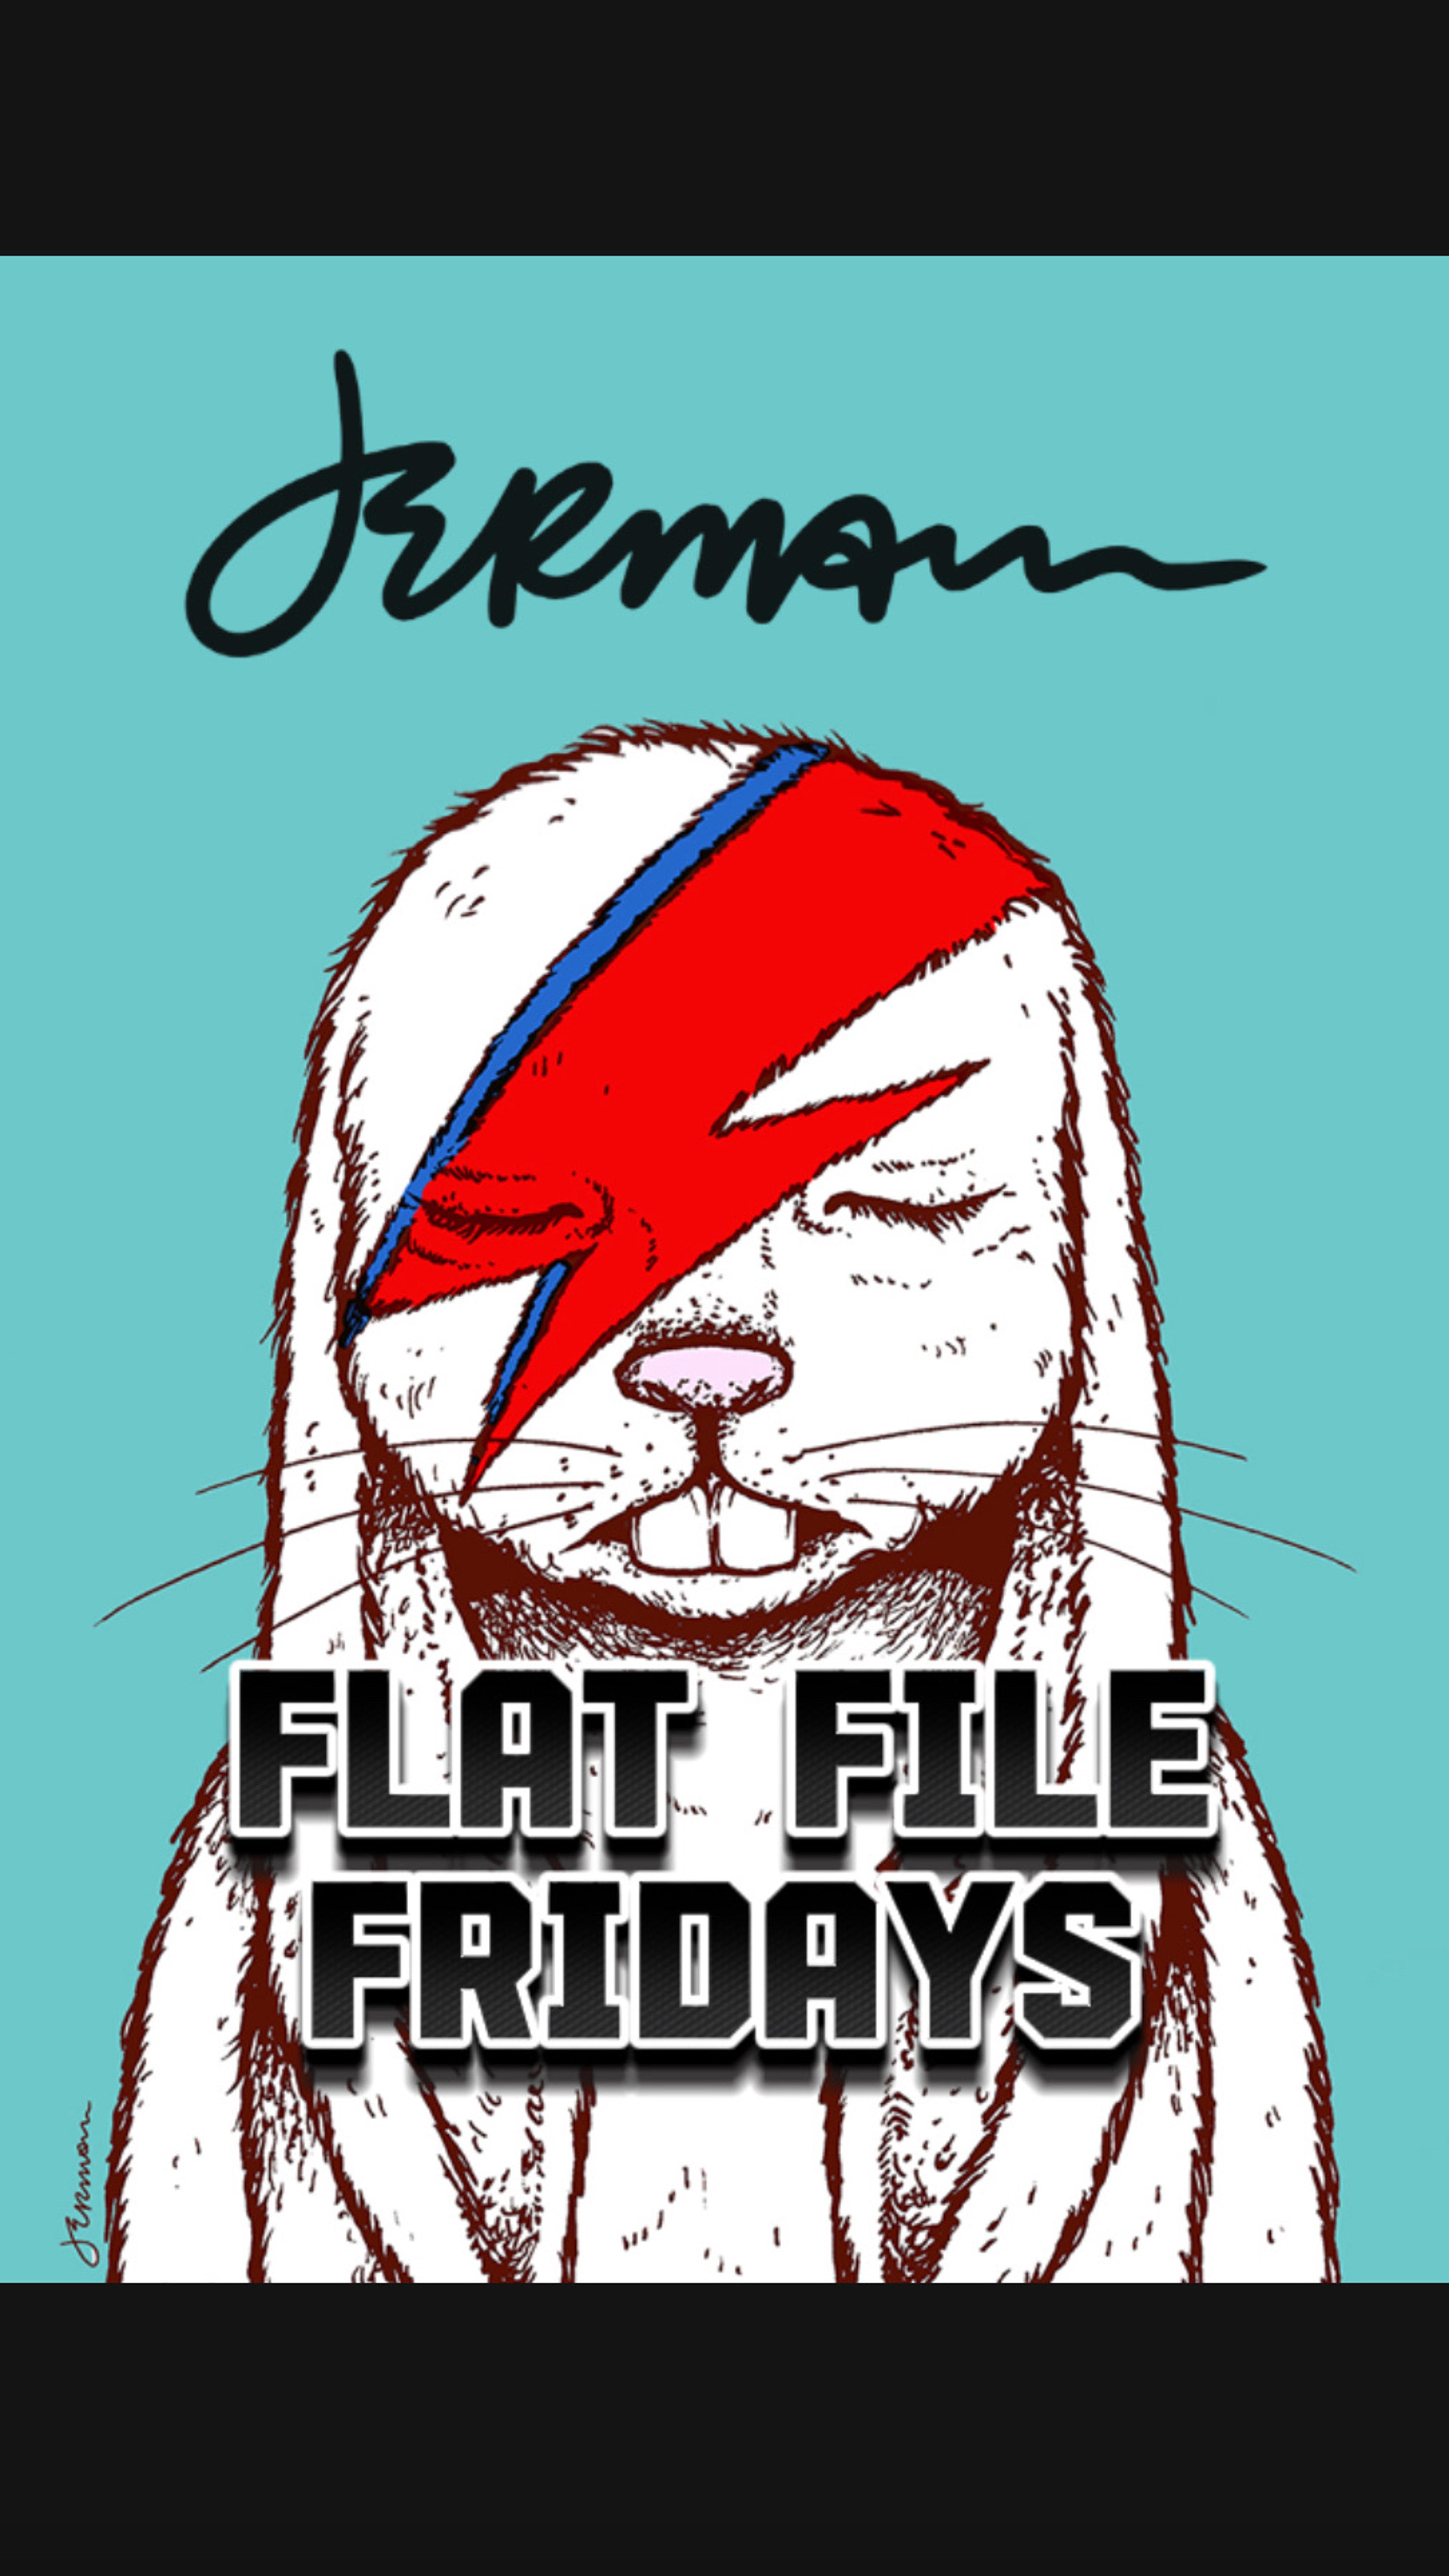 Preview image for the show titled "FLAT FILE FRIDAYS
With Jermaine / Rare Rock Posters & More" at July 26, 2024